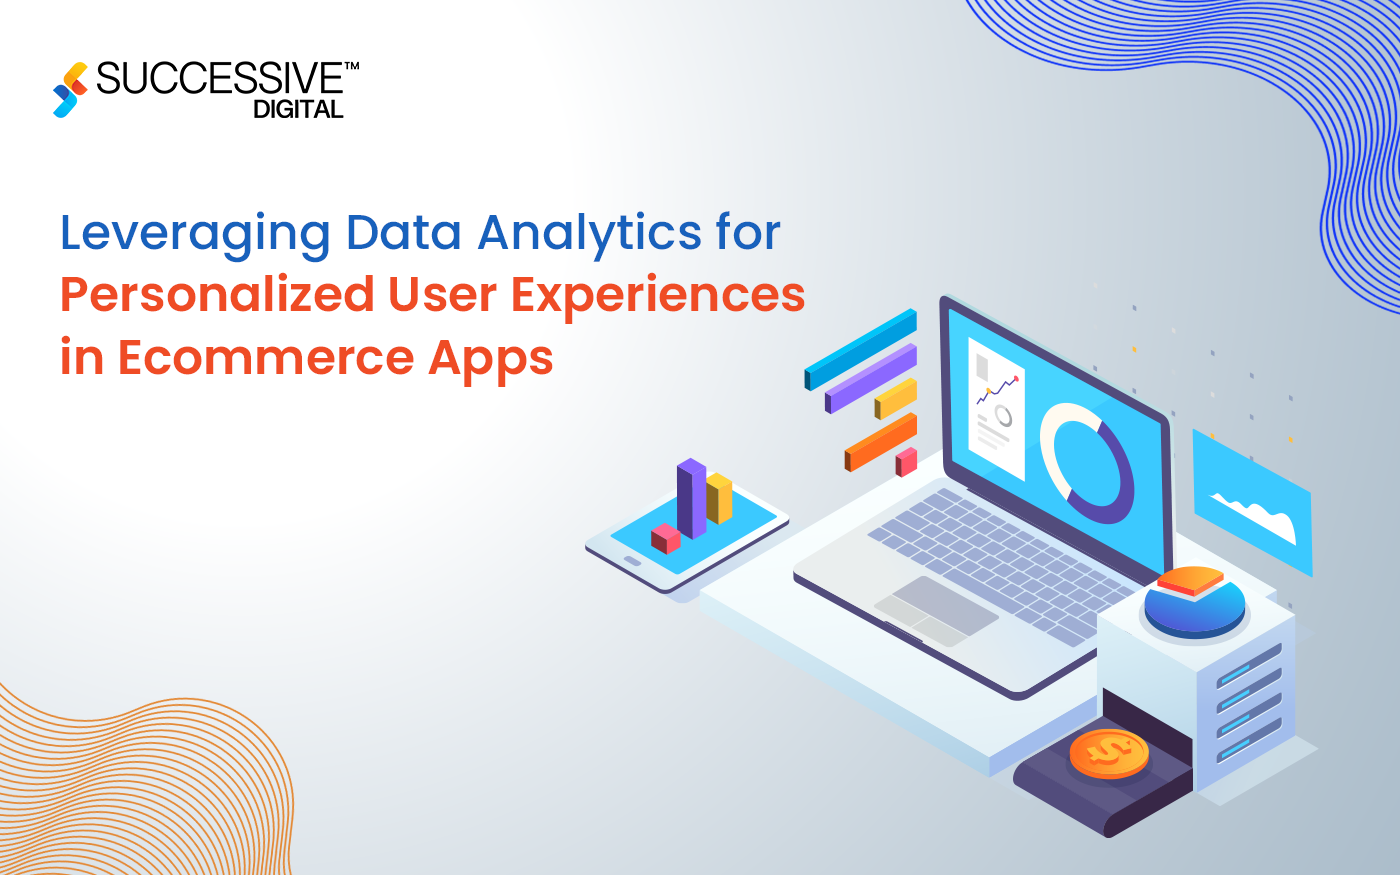 Leveraging Data Analytics for Personalized User Experiences in Ecommerce Apps